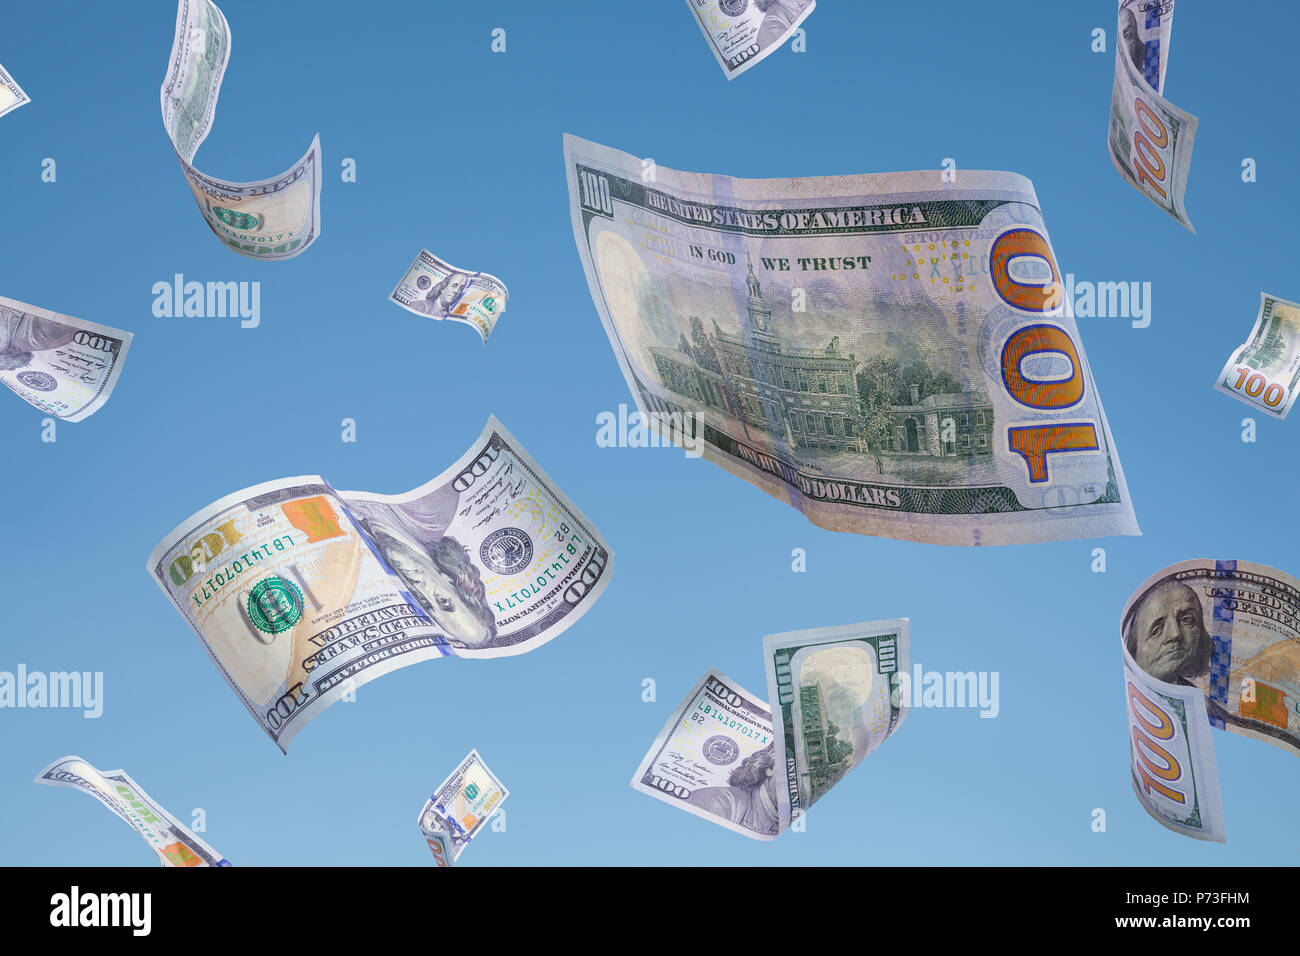 Money Falling Down in a Blue Sky. Stock Photo